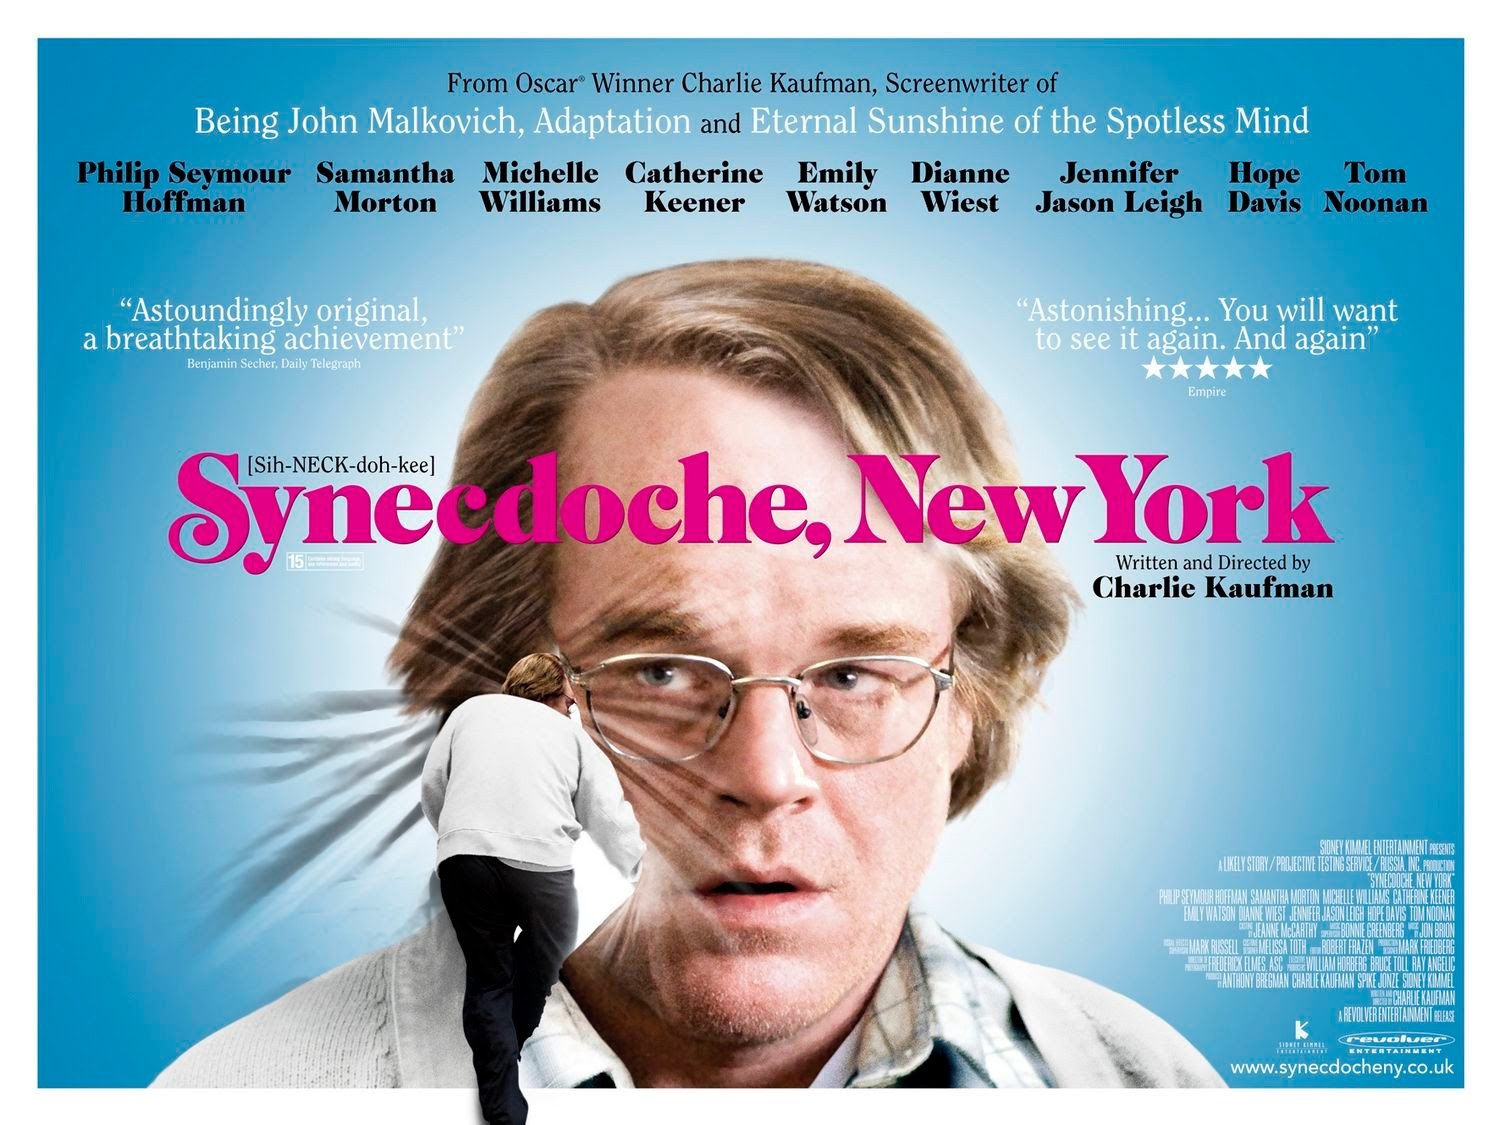 You are currently viewing Notes On A Film: Synecdoche, New York